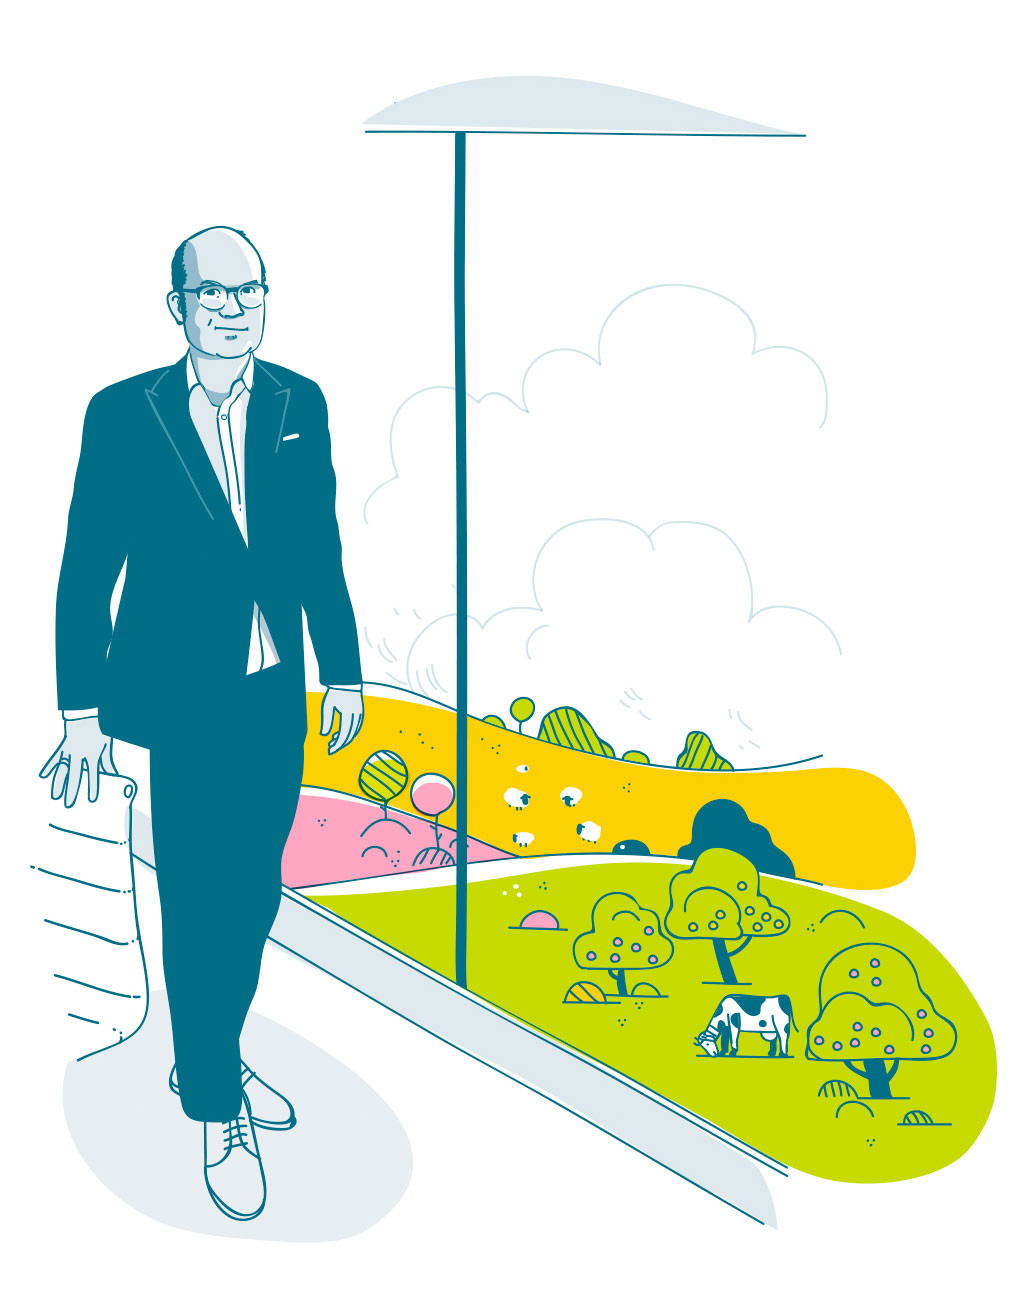 Peter Dietiker, division manager at Energie 360° (Illustration: Christoph Frei)